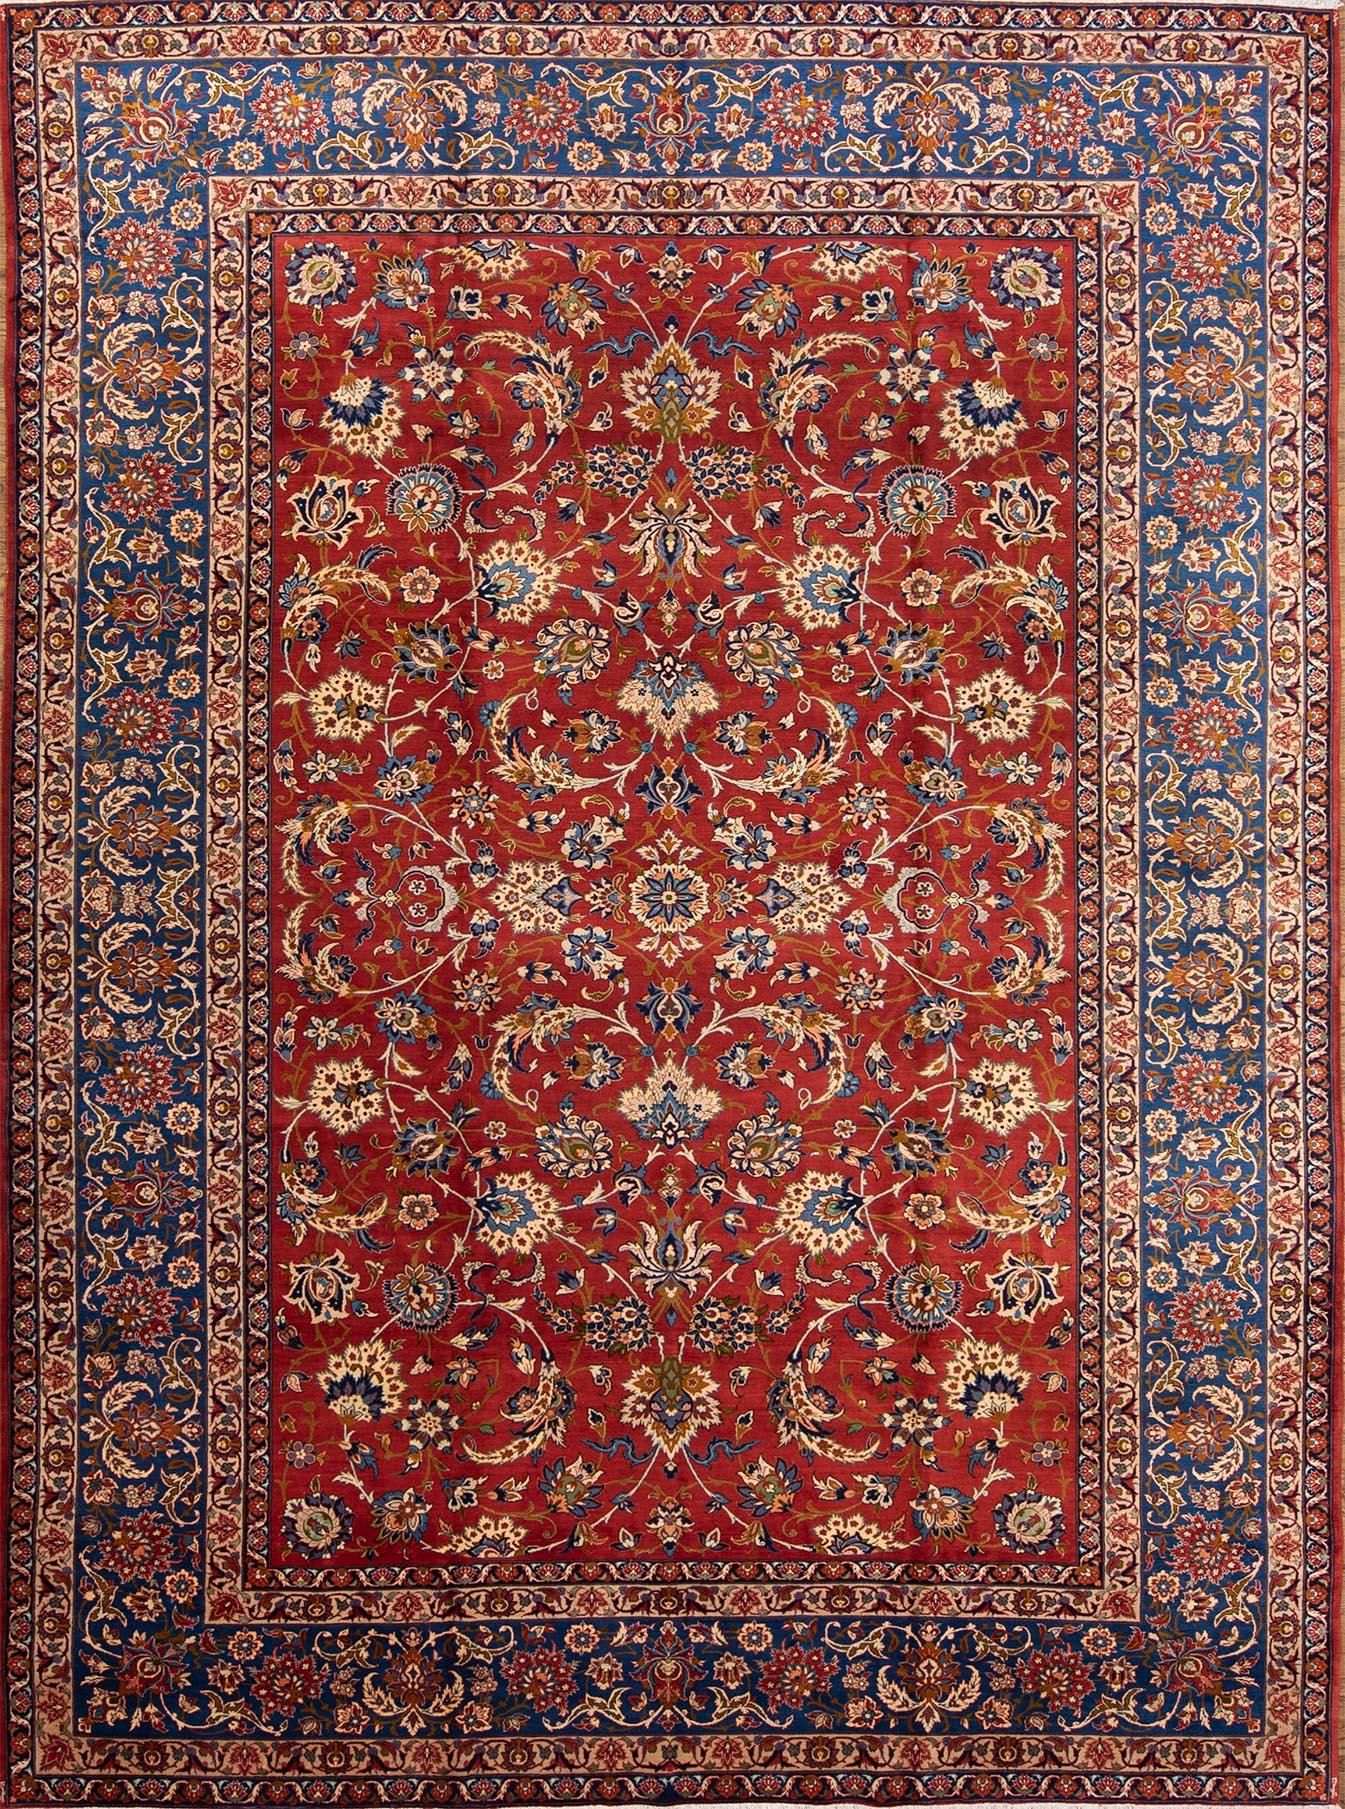 Persian floral rug. Hand knotted Persian Isfahan floral wool rug in orange red and blue colors. Size 10.9x14.6.